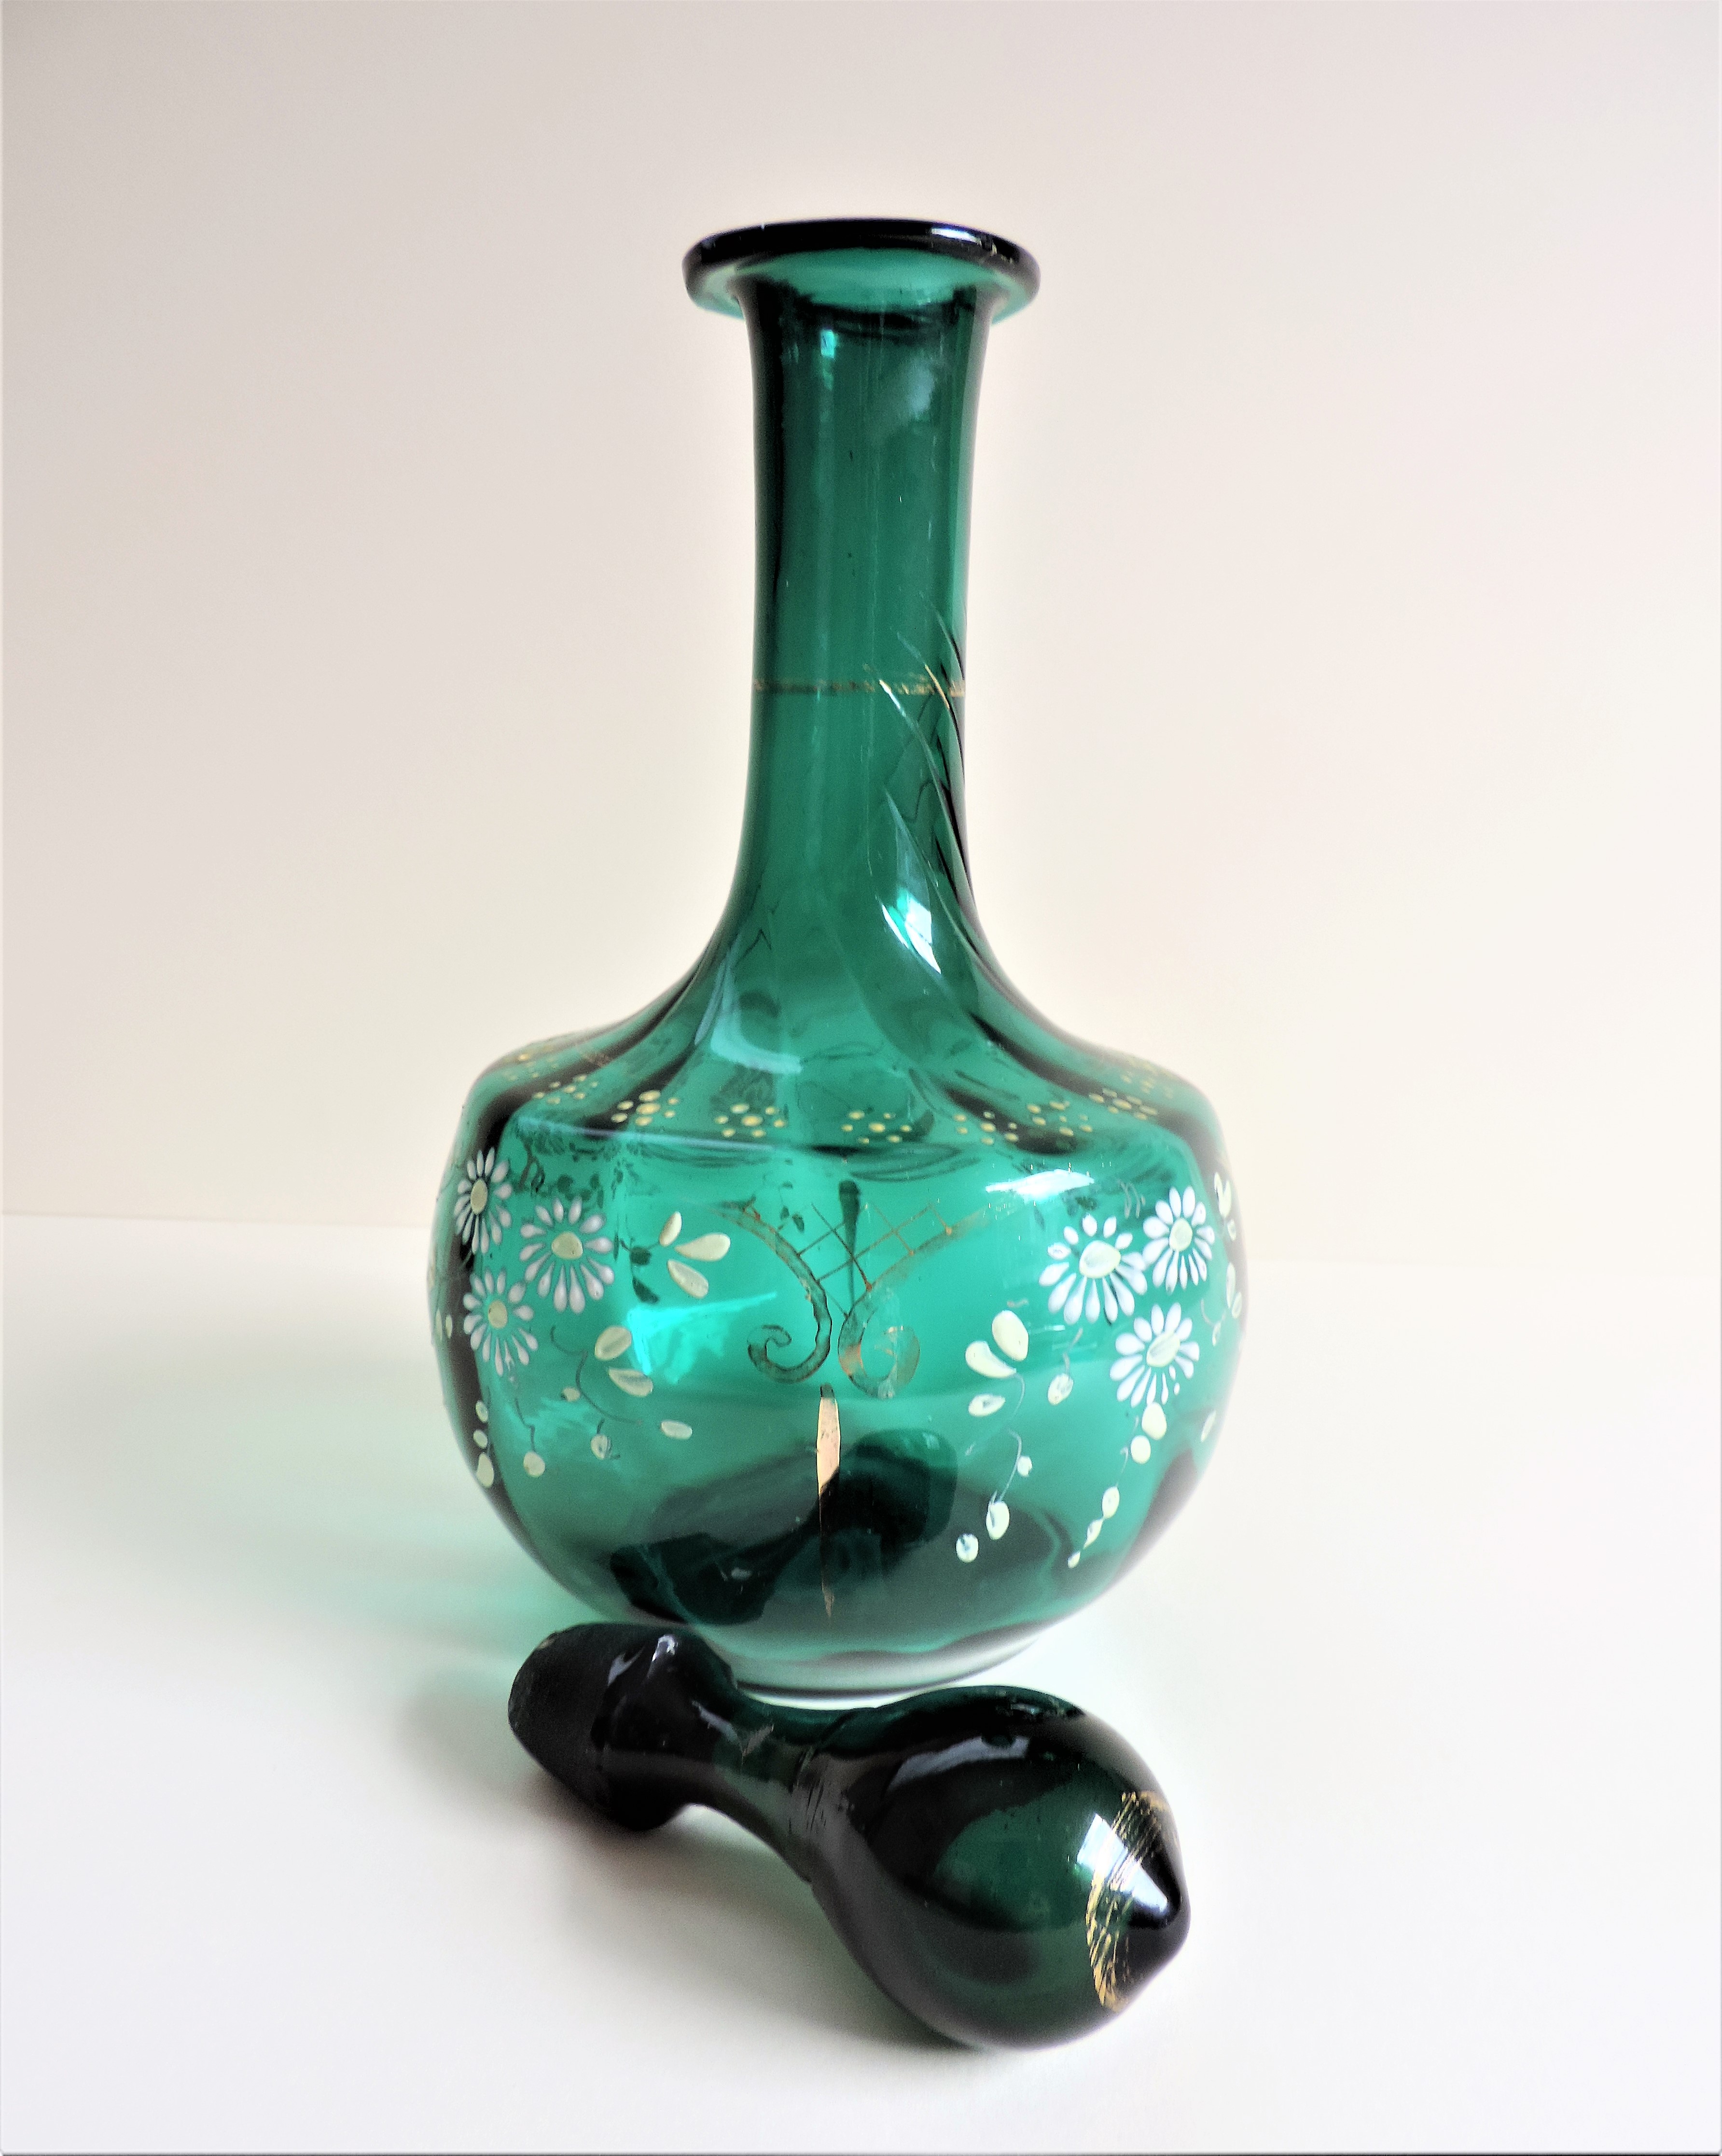 Vintage Hand Painted Decanter - Image 3 of 7